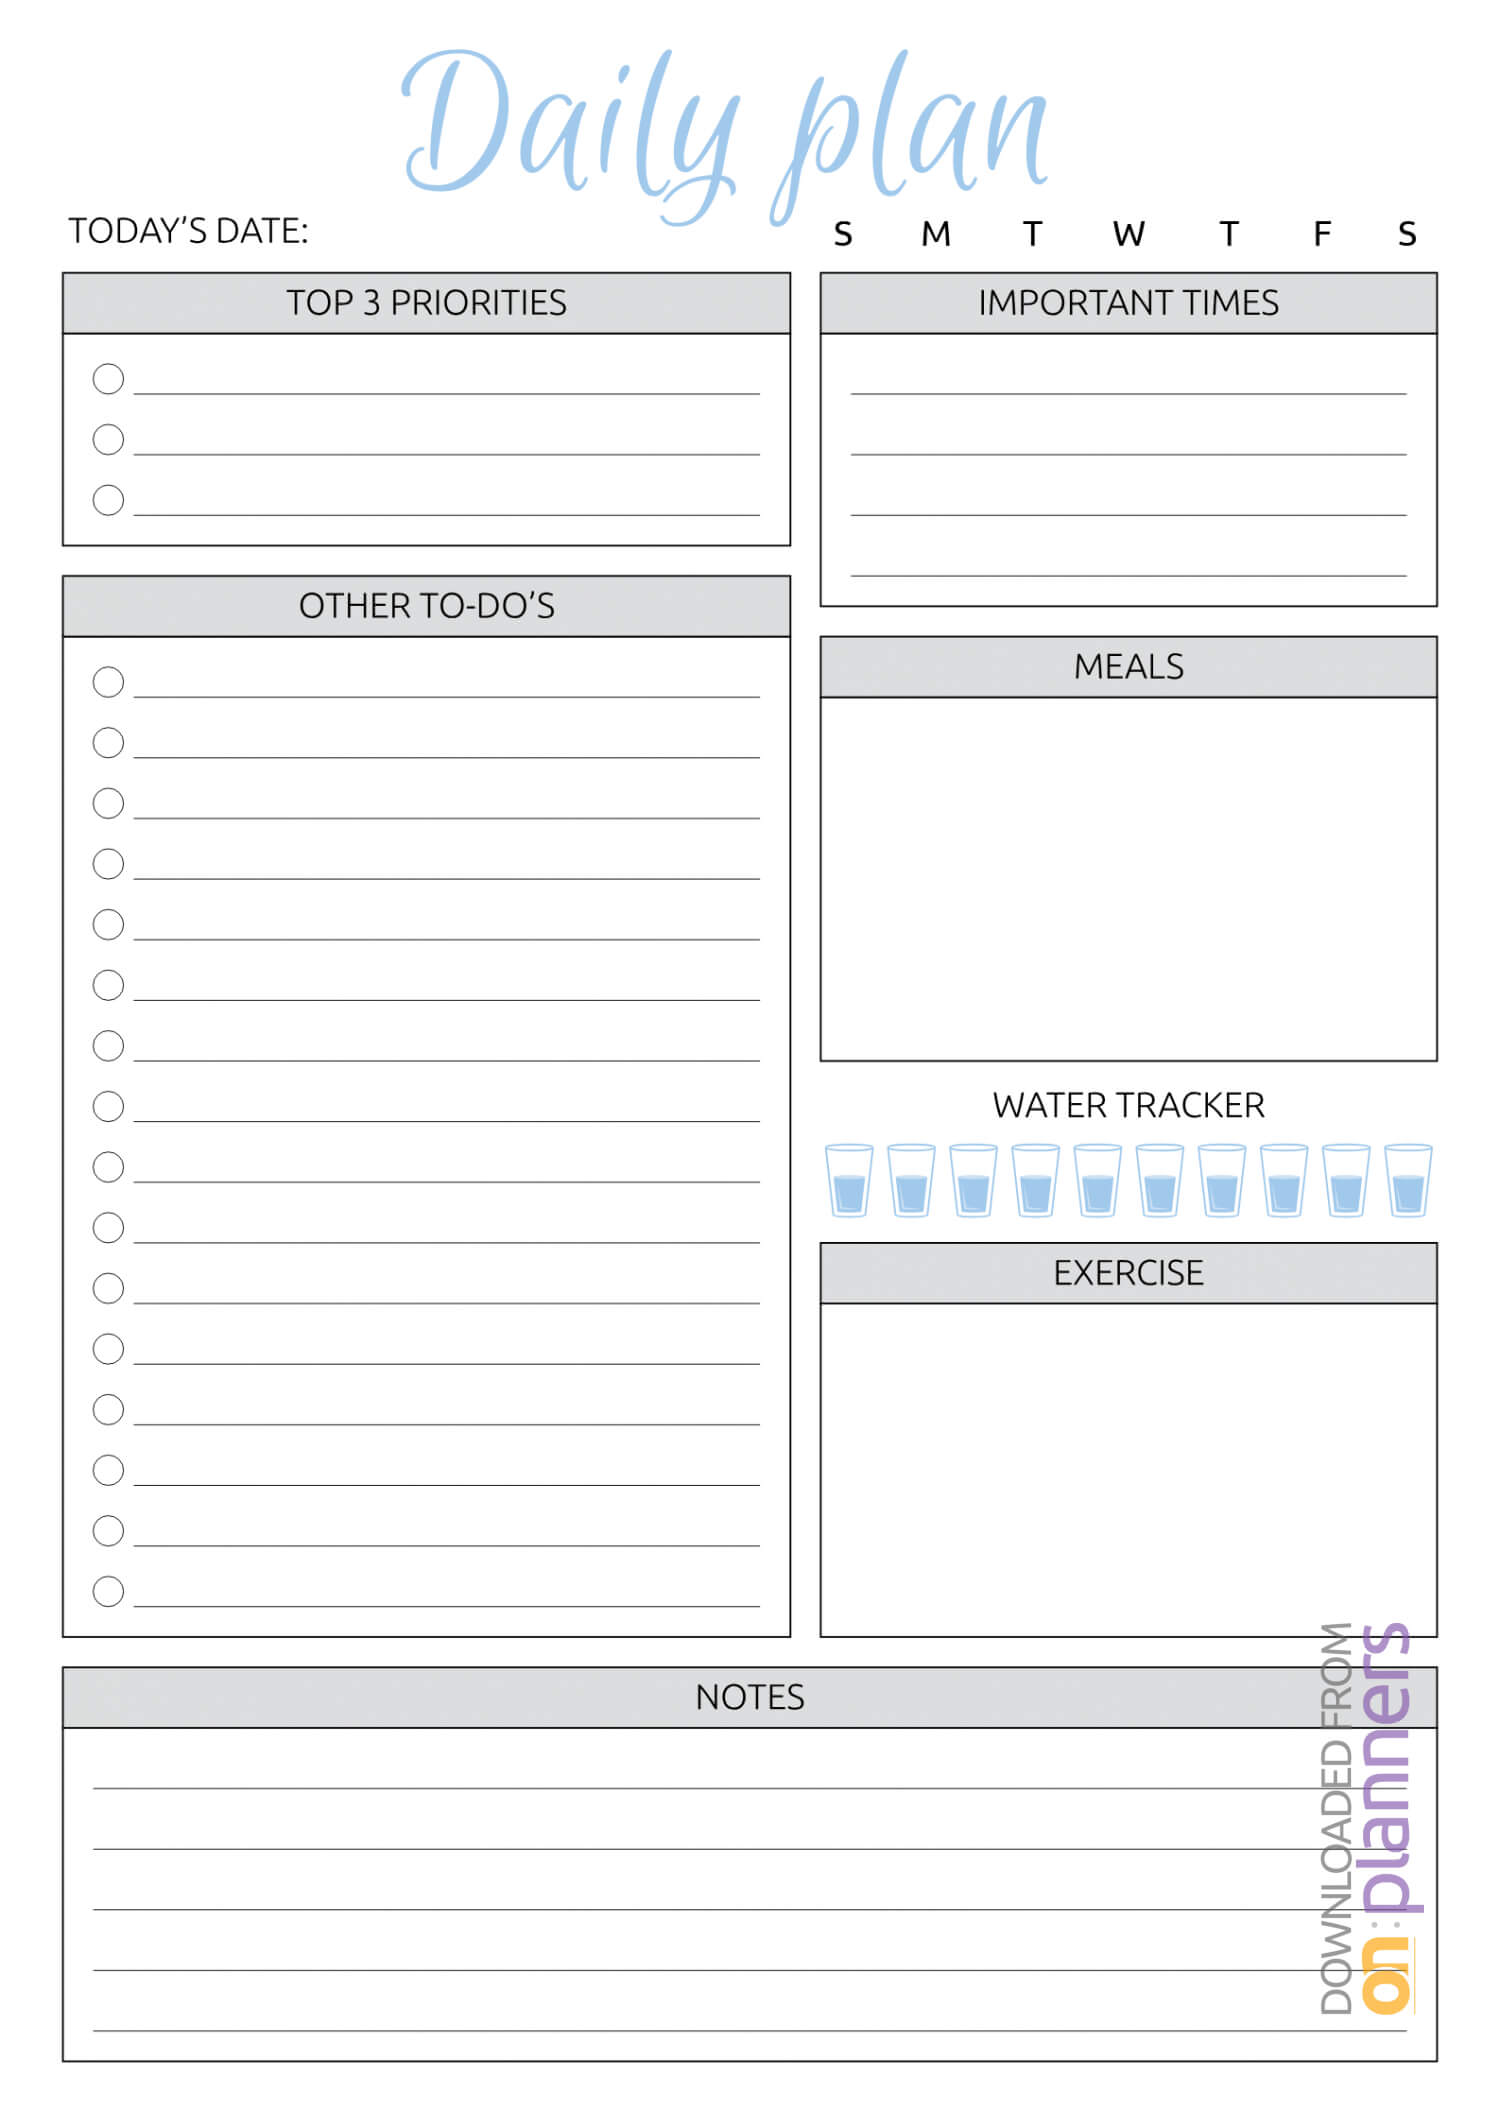 Download Printable Daily Plan With To Do List & Important In Blank To Do List Template